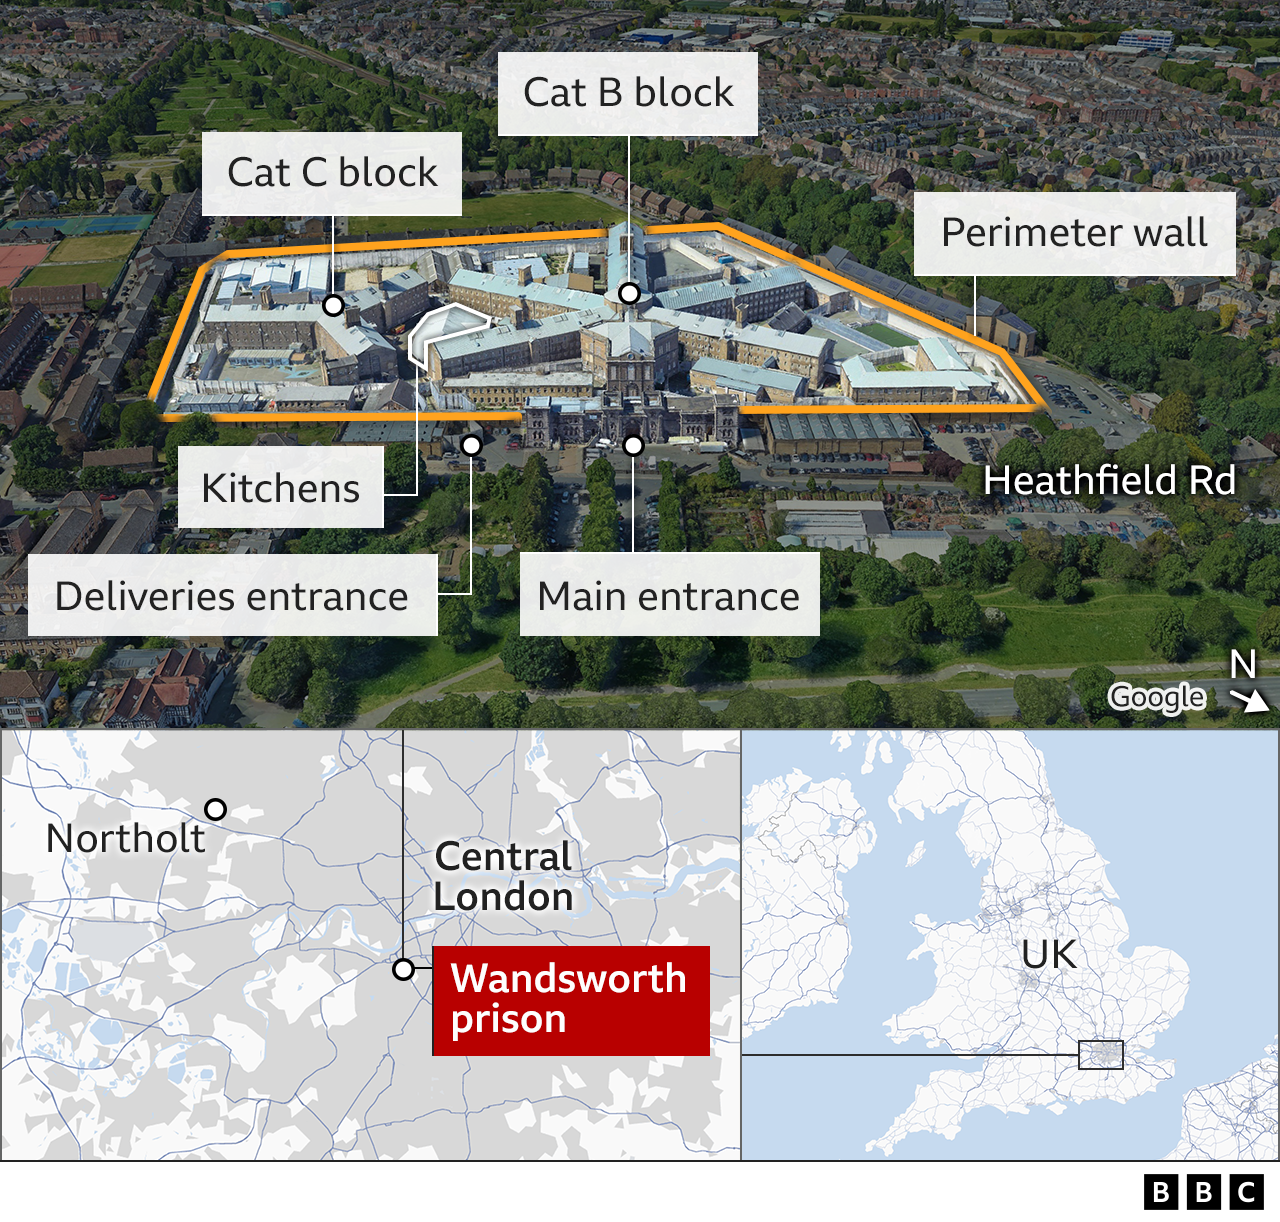 Map showing Wandsworth prison and Northolt